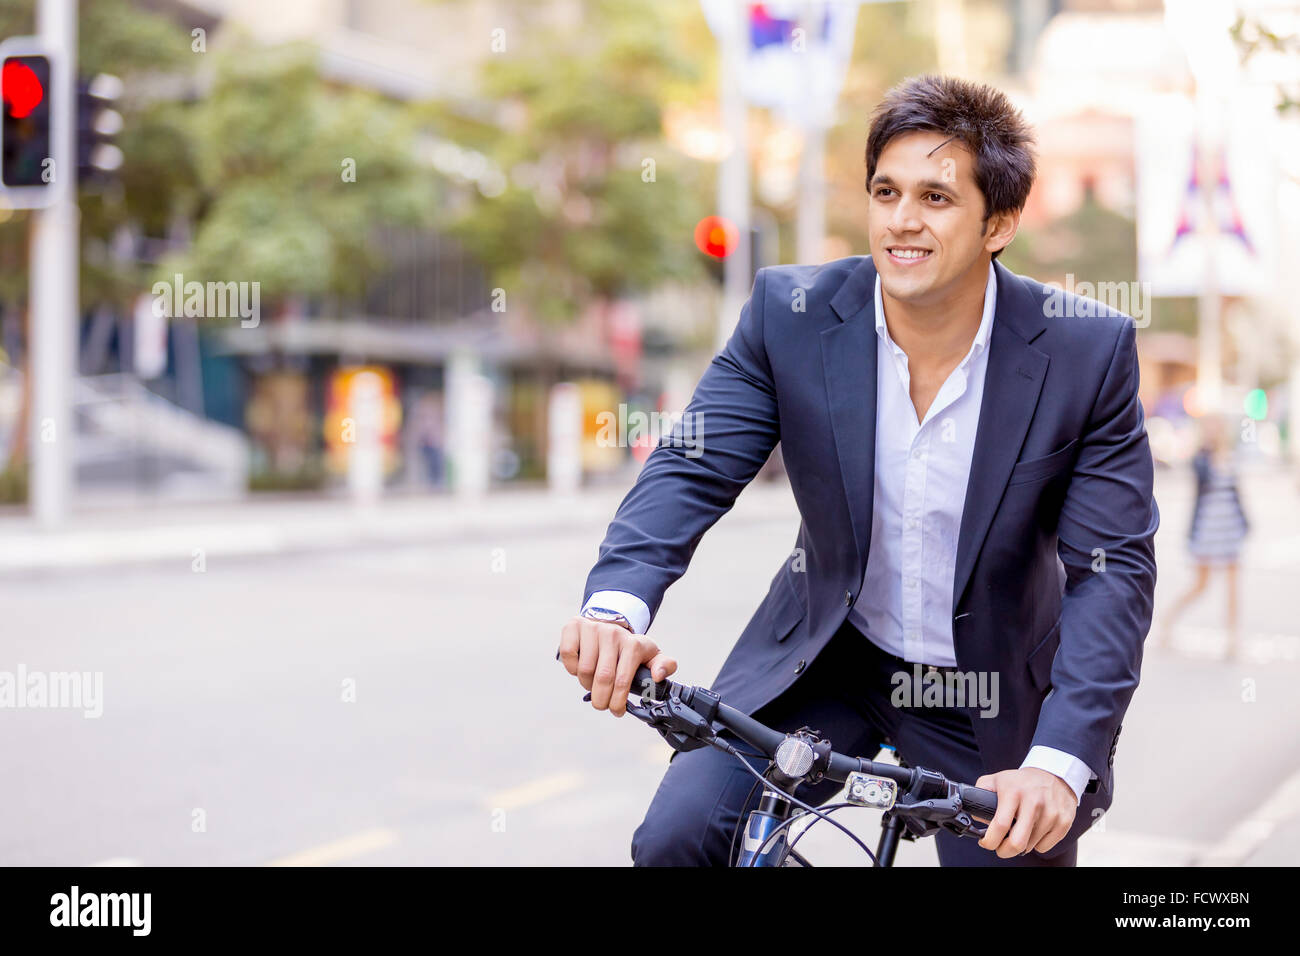 Successful businessman in suit riding bicycle Stock Photo